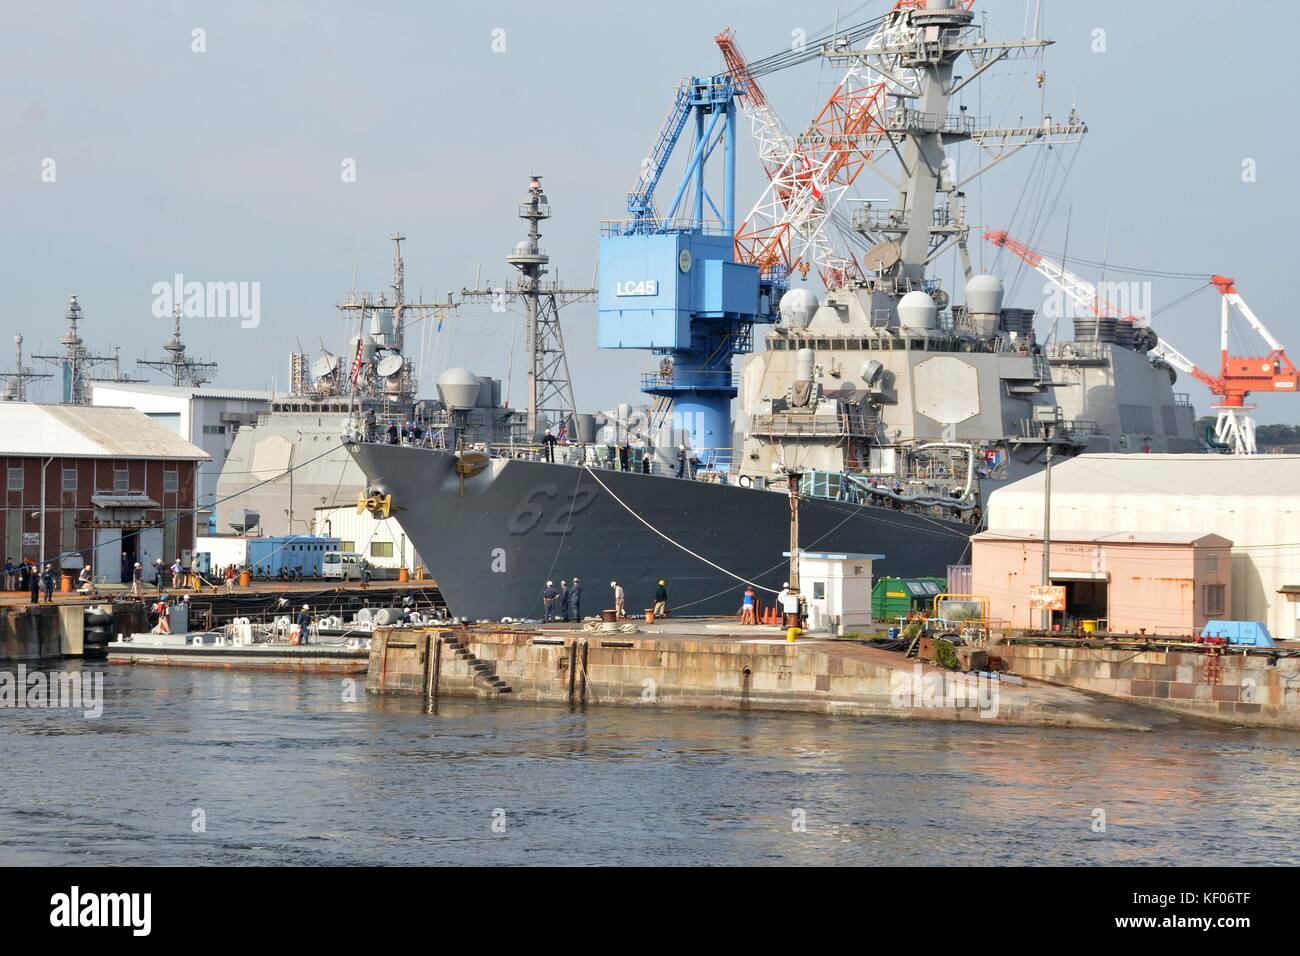 The U.S. Navy Arleigh Burke-class guided-missile destroyer USS Fitzgerald leaves the dry dock at Fleet Activities Yokosuka to undergo further repairs following its collision with a container ship October 8, 2017 in Yokosuka, Japan. Stock Photo